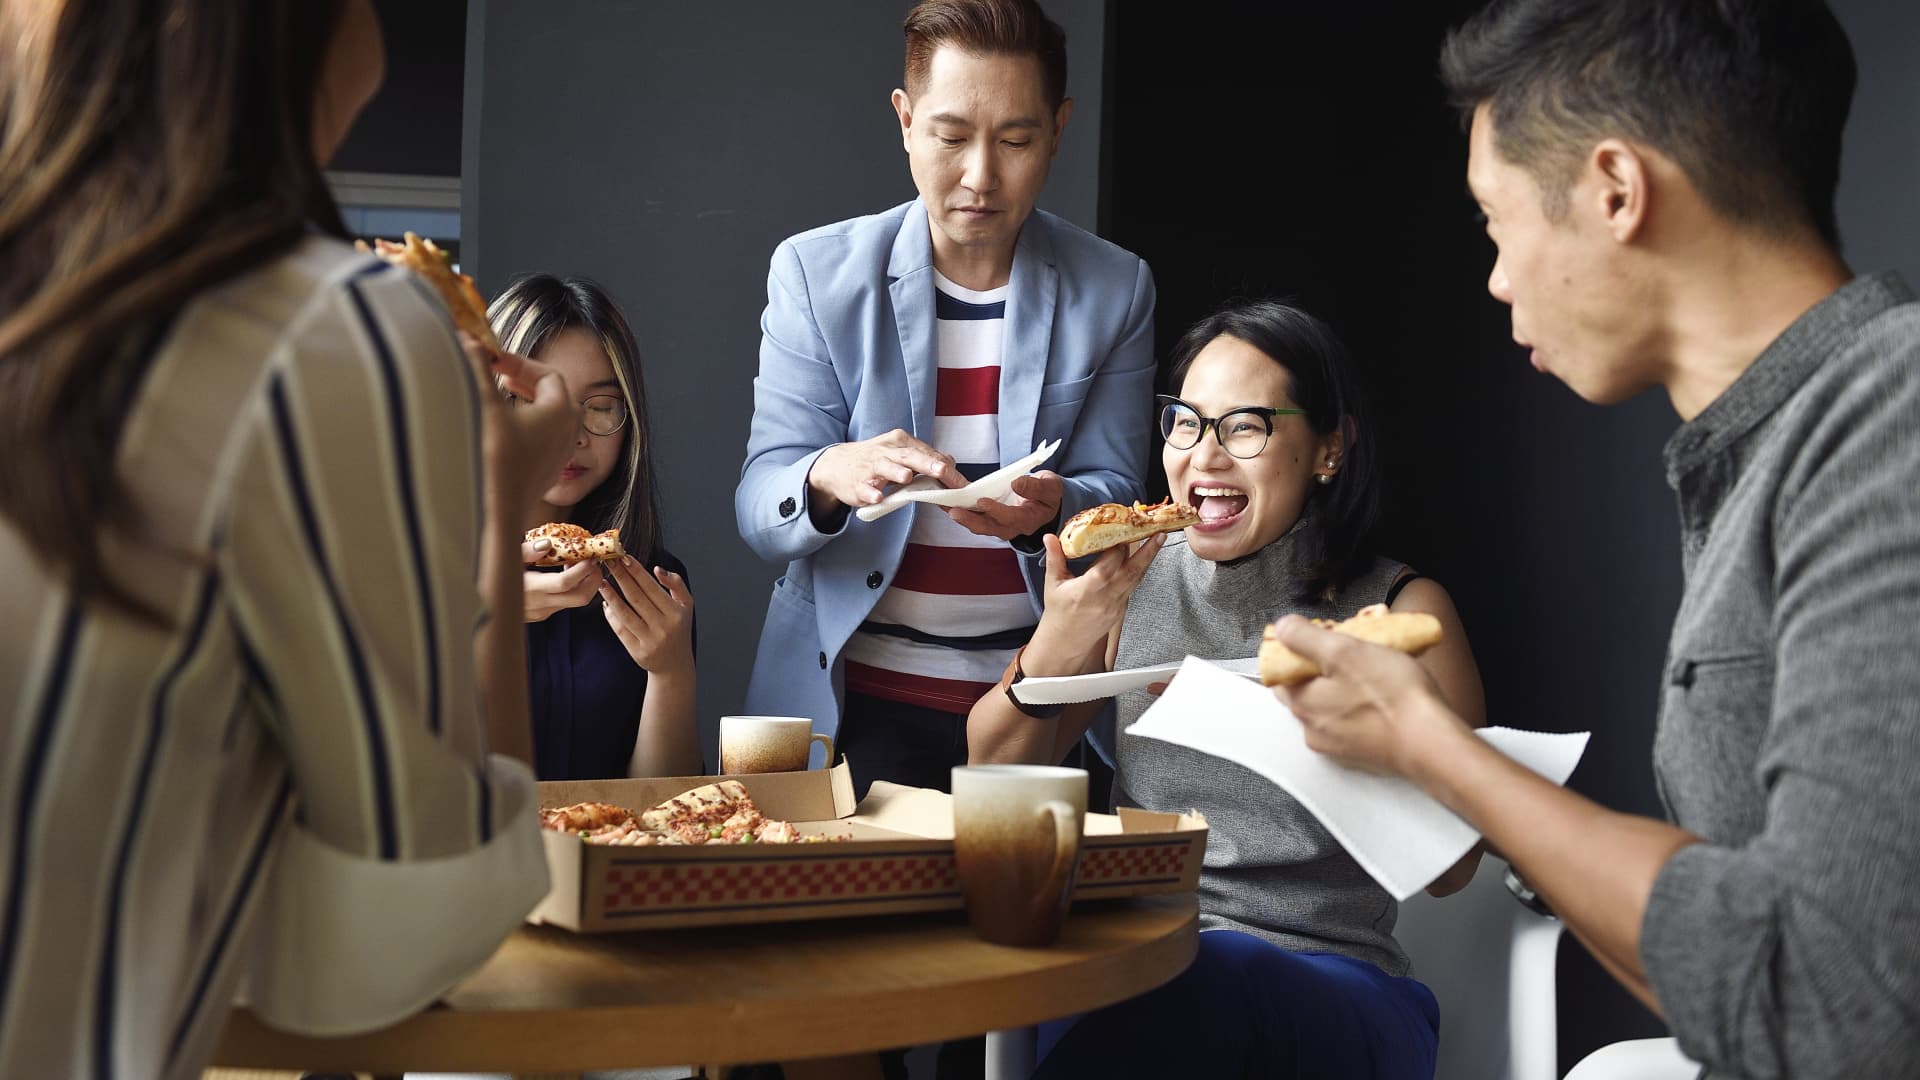 Employees want holiday bonuses this year–but they may be getting pizza parties instead